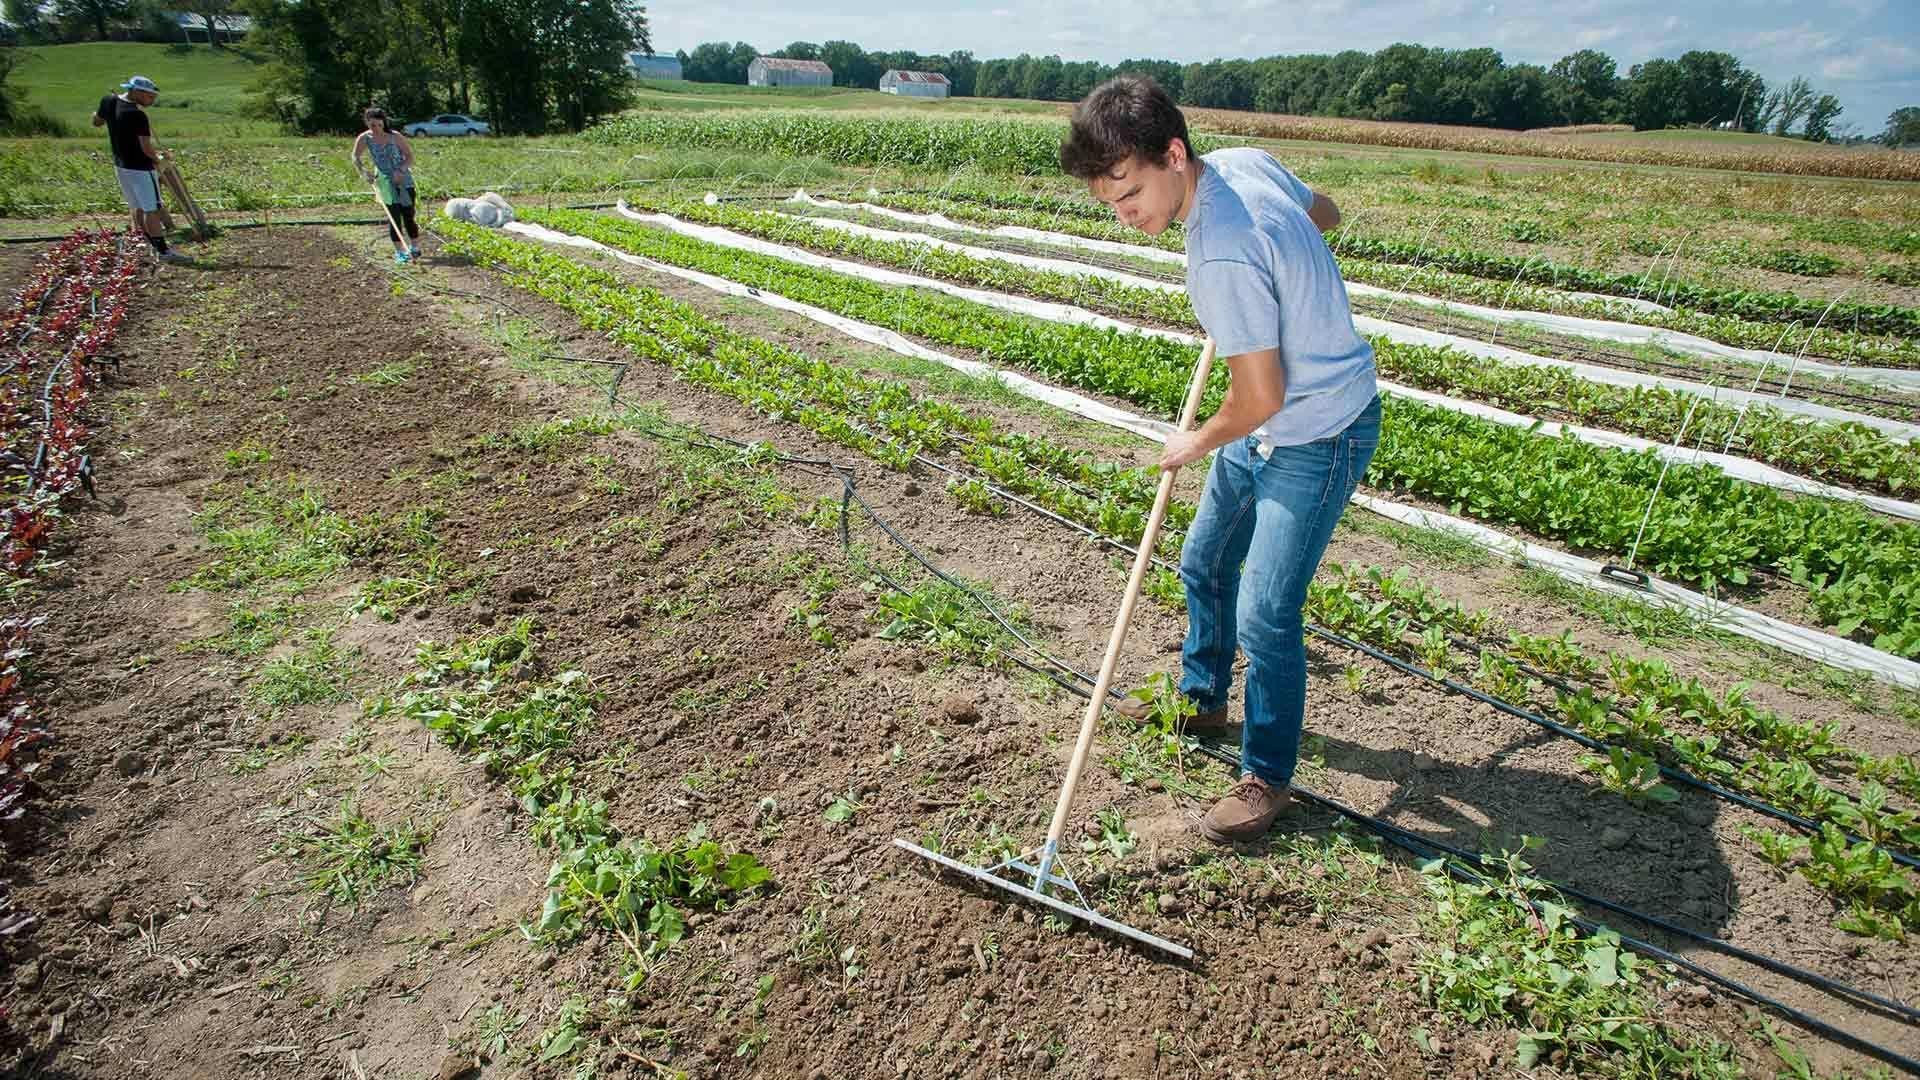 Student at Terp Farm, photo credits: Edwin Remsberg and S. Cordle.